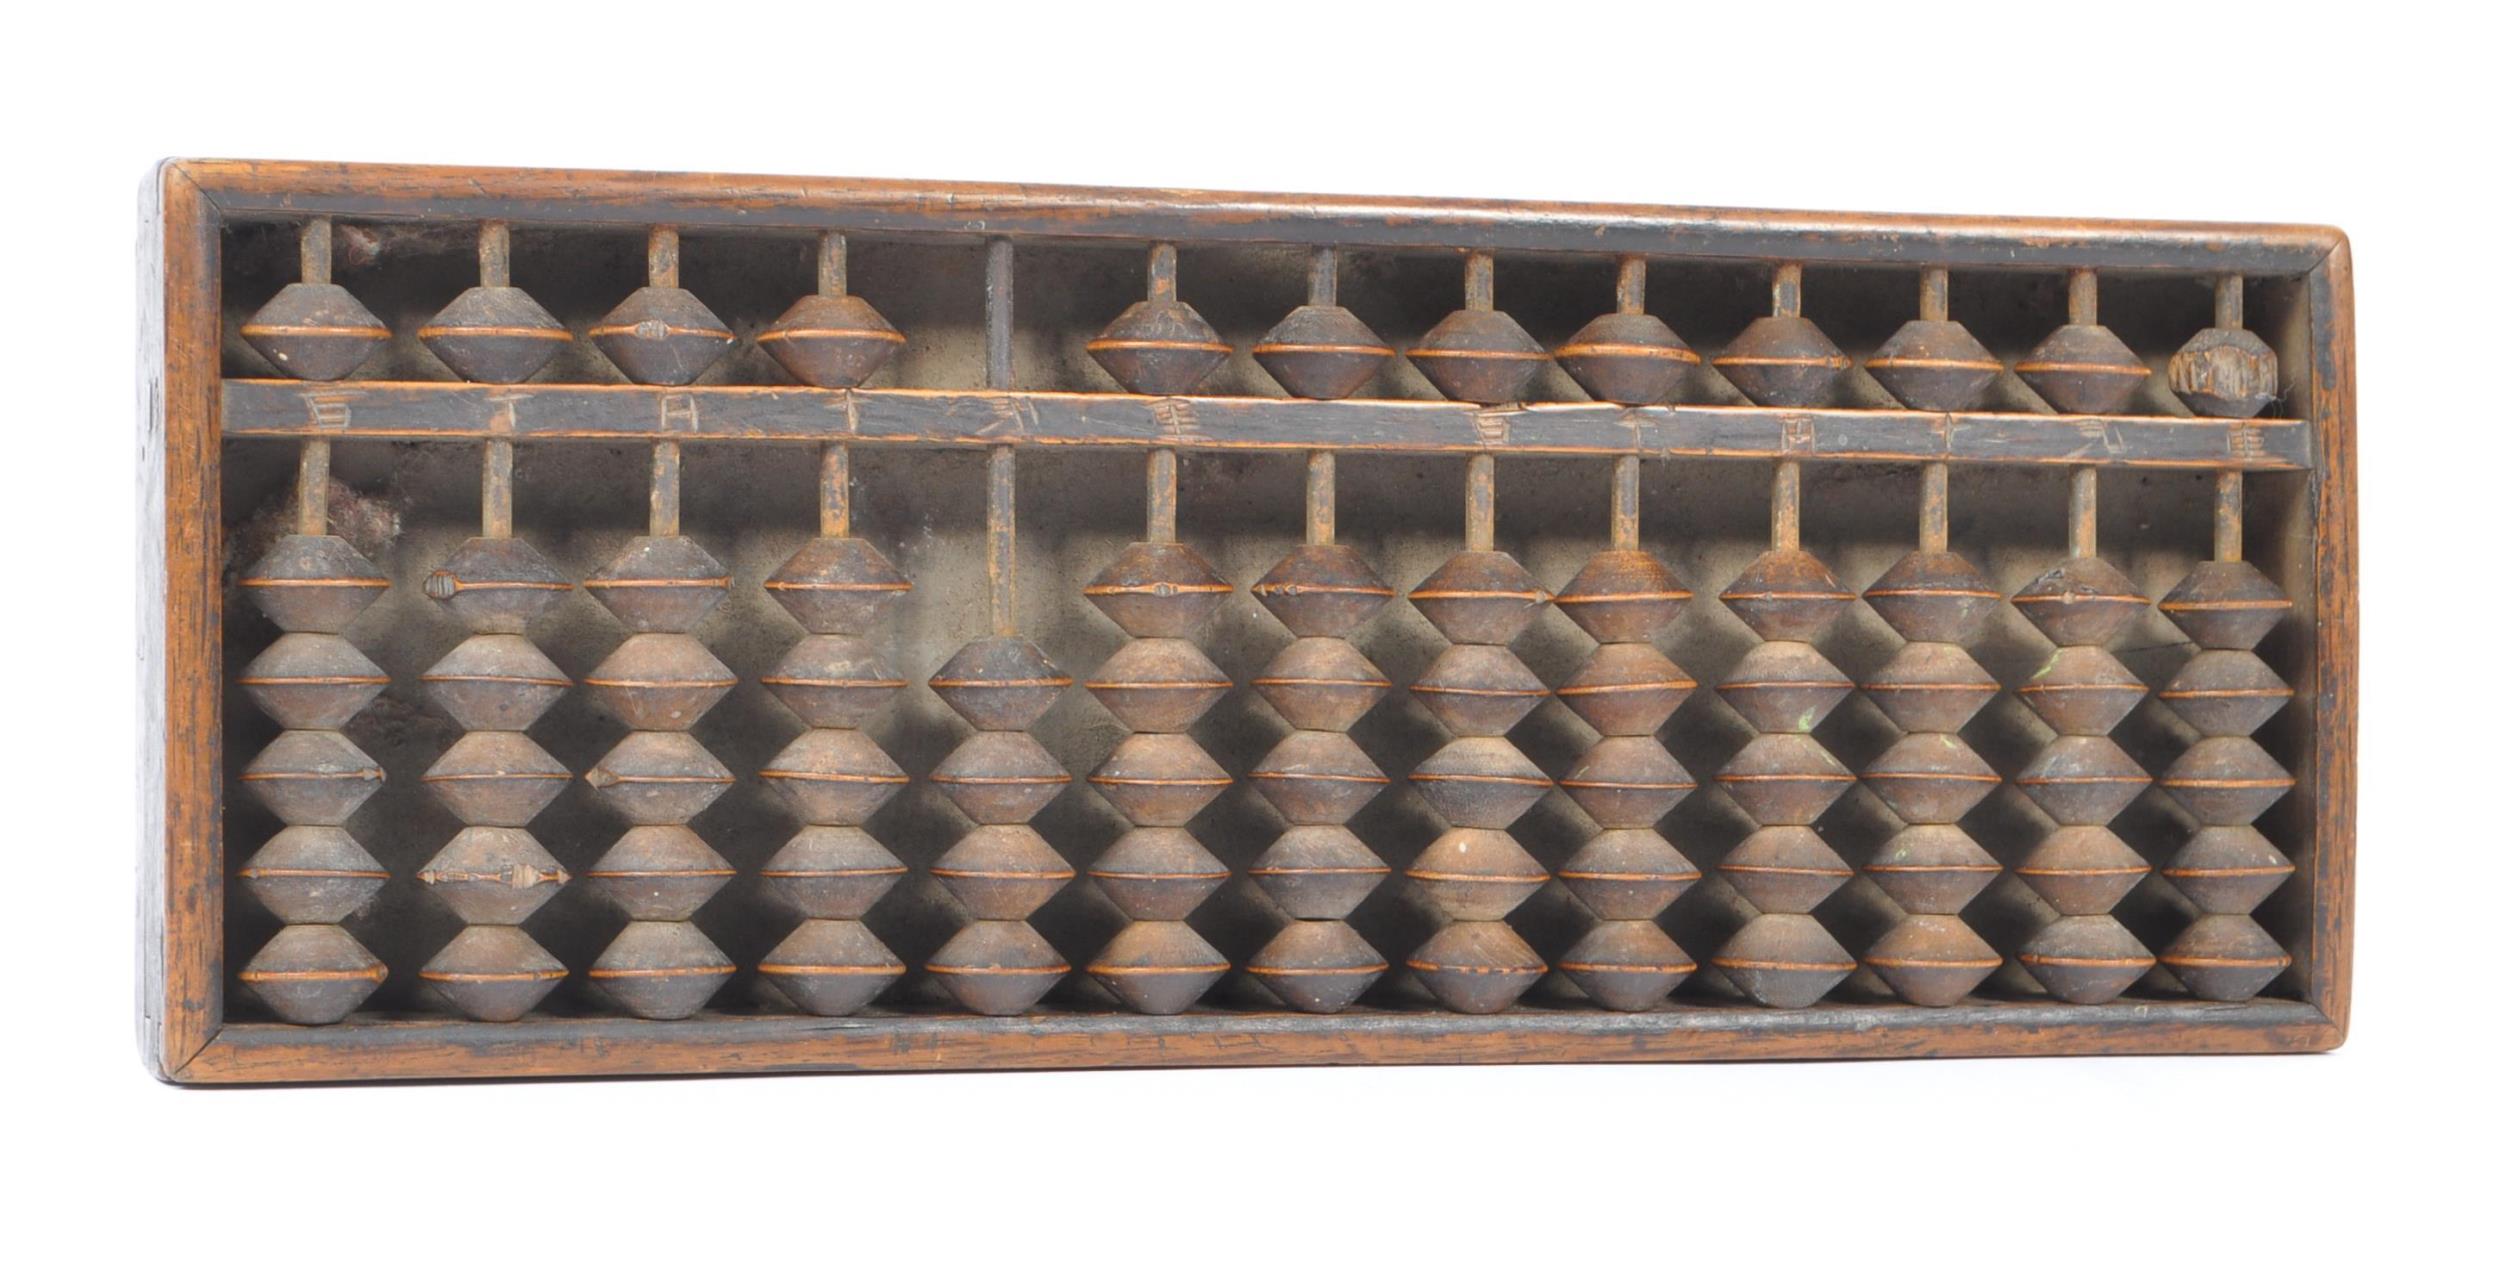 EARLY 20TH CENTURY CHINESE WOOD ABACUS